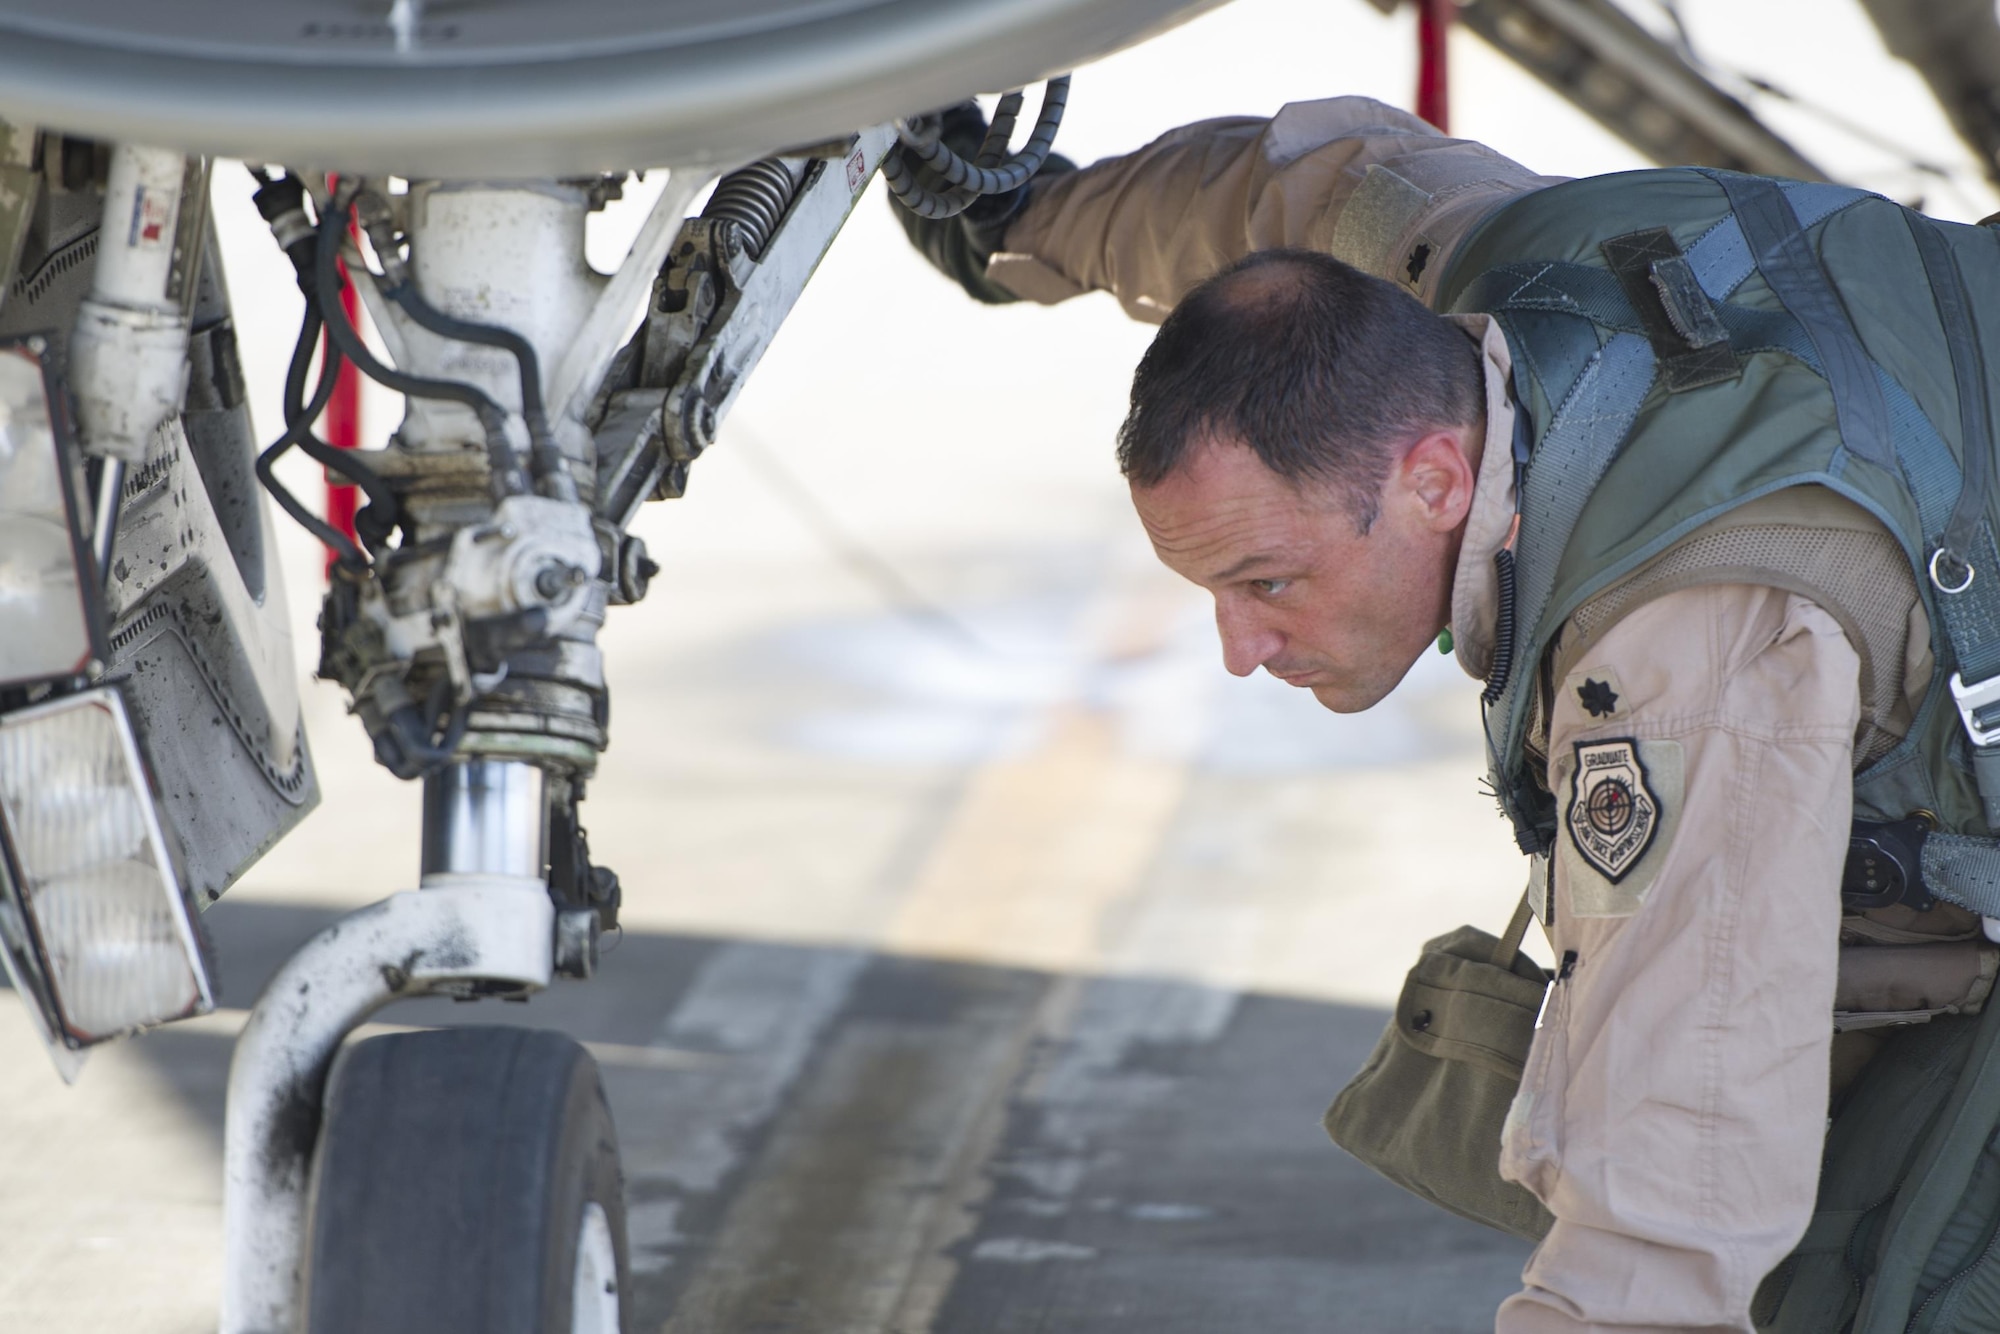 Lt. Col. Michael Meyer, 421st Expeditionary Fighter Squadron commander, deployed from Hill Air Force Base, Utah, performs pre-flight checks on an F-16 Fighting Falcon at Bagram Airfield, Afghanistan, Oct. 30, 2015. Airmen assigned to the 421st FS, known as the “Black Widows,” arrived here Oct. 28, 2015 in support of Operation Freedom’s Sentinel and NATO’s Resolute Support mission. (U.S. Air Force photo/Tech. Sgt. Robert Cloys/Released)